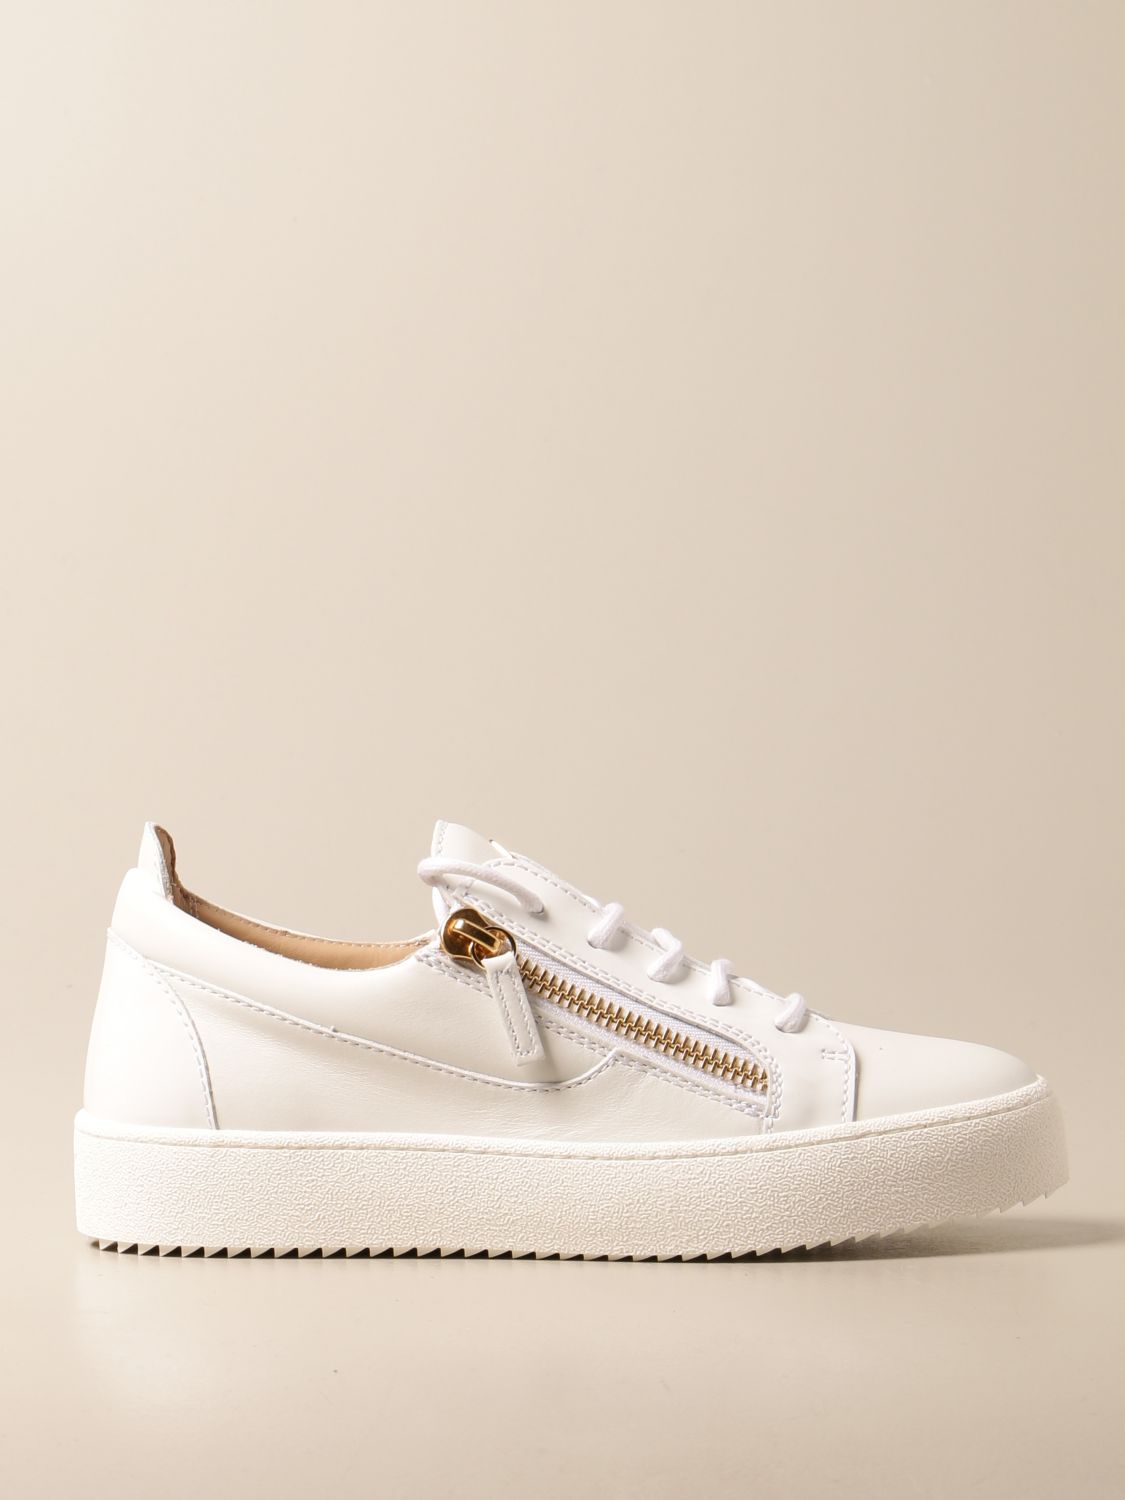 GIUSEPPE ZANOTTI sneakers in leather and patent leather Sneakers Giuseppe Zanotti Design Women White | Sneakers Giuseppe Zanotti RW00017 GIGLIO.COM